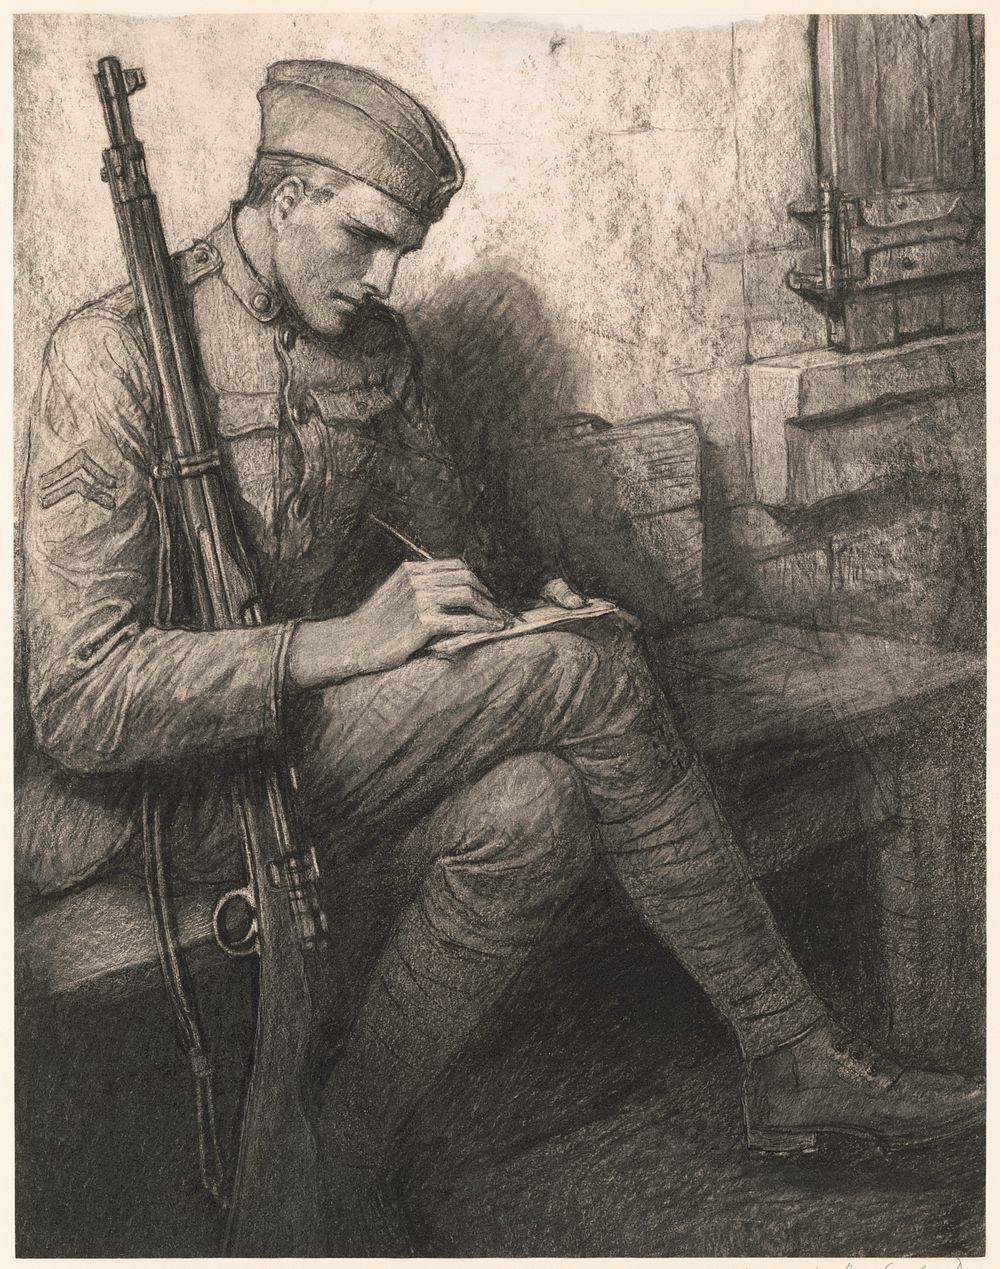 Soldier writing letter (1919) by Wladyslaw Theodore Benda